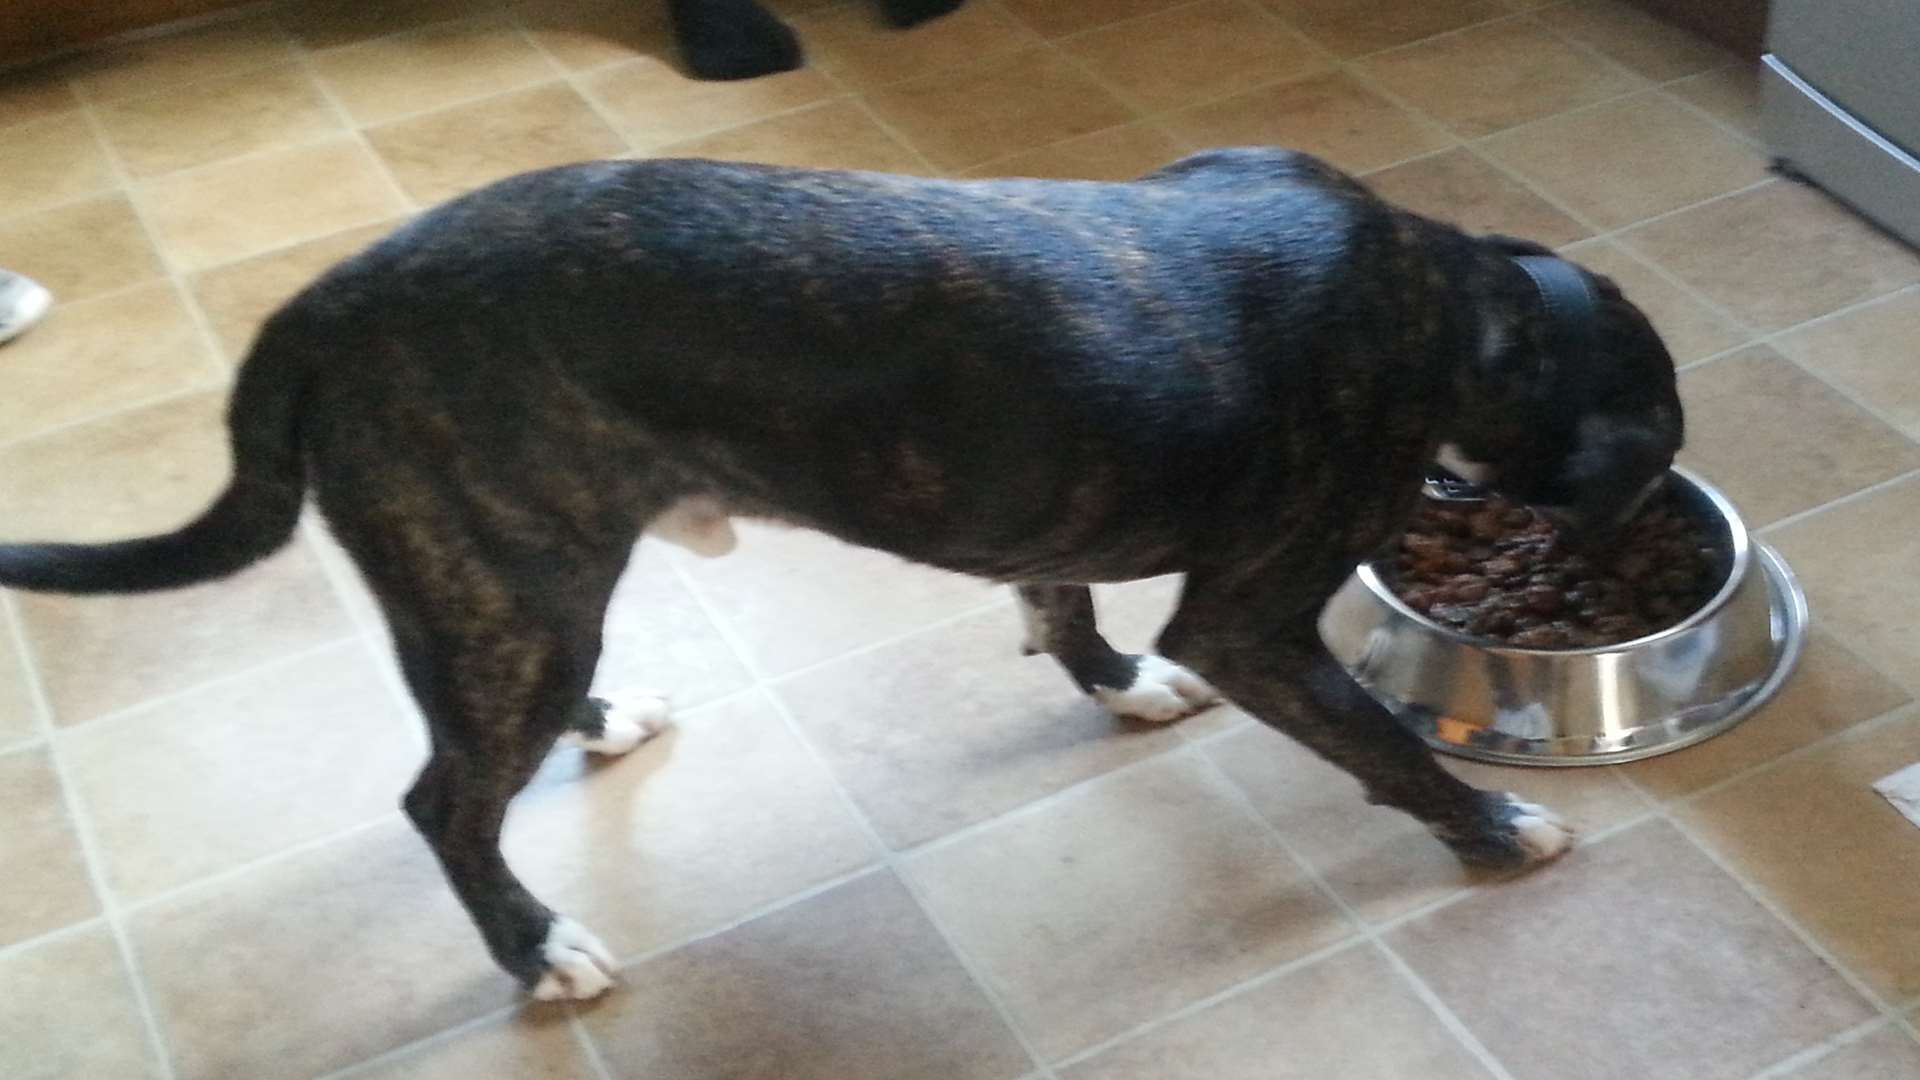 Max laps up a well-deserved meal after his ordeal